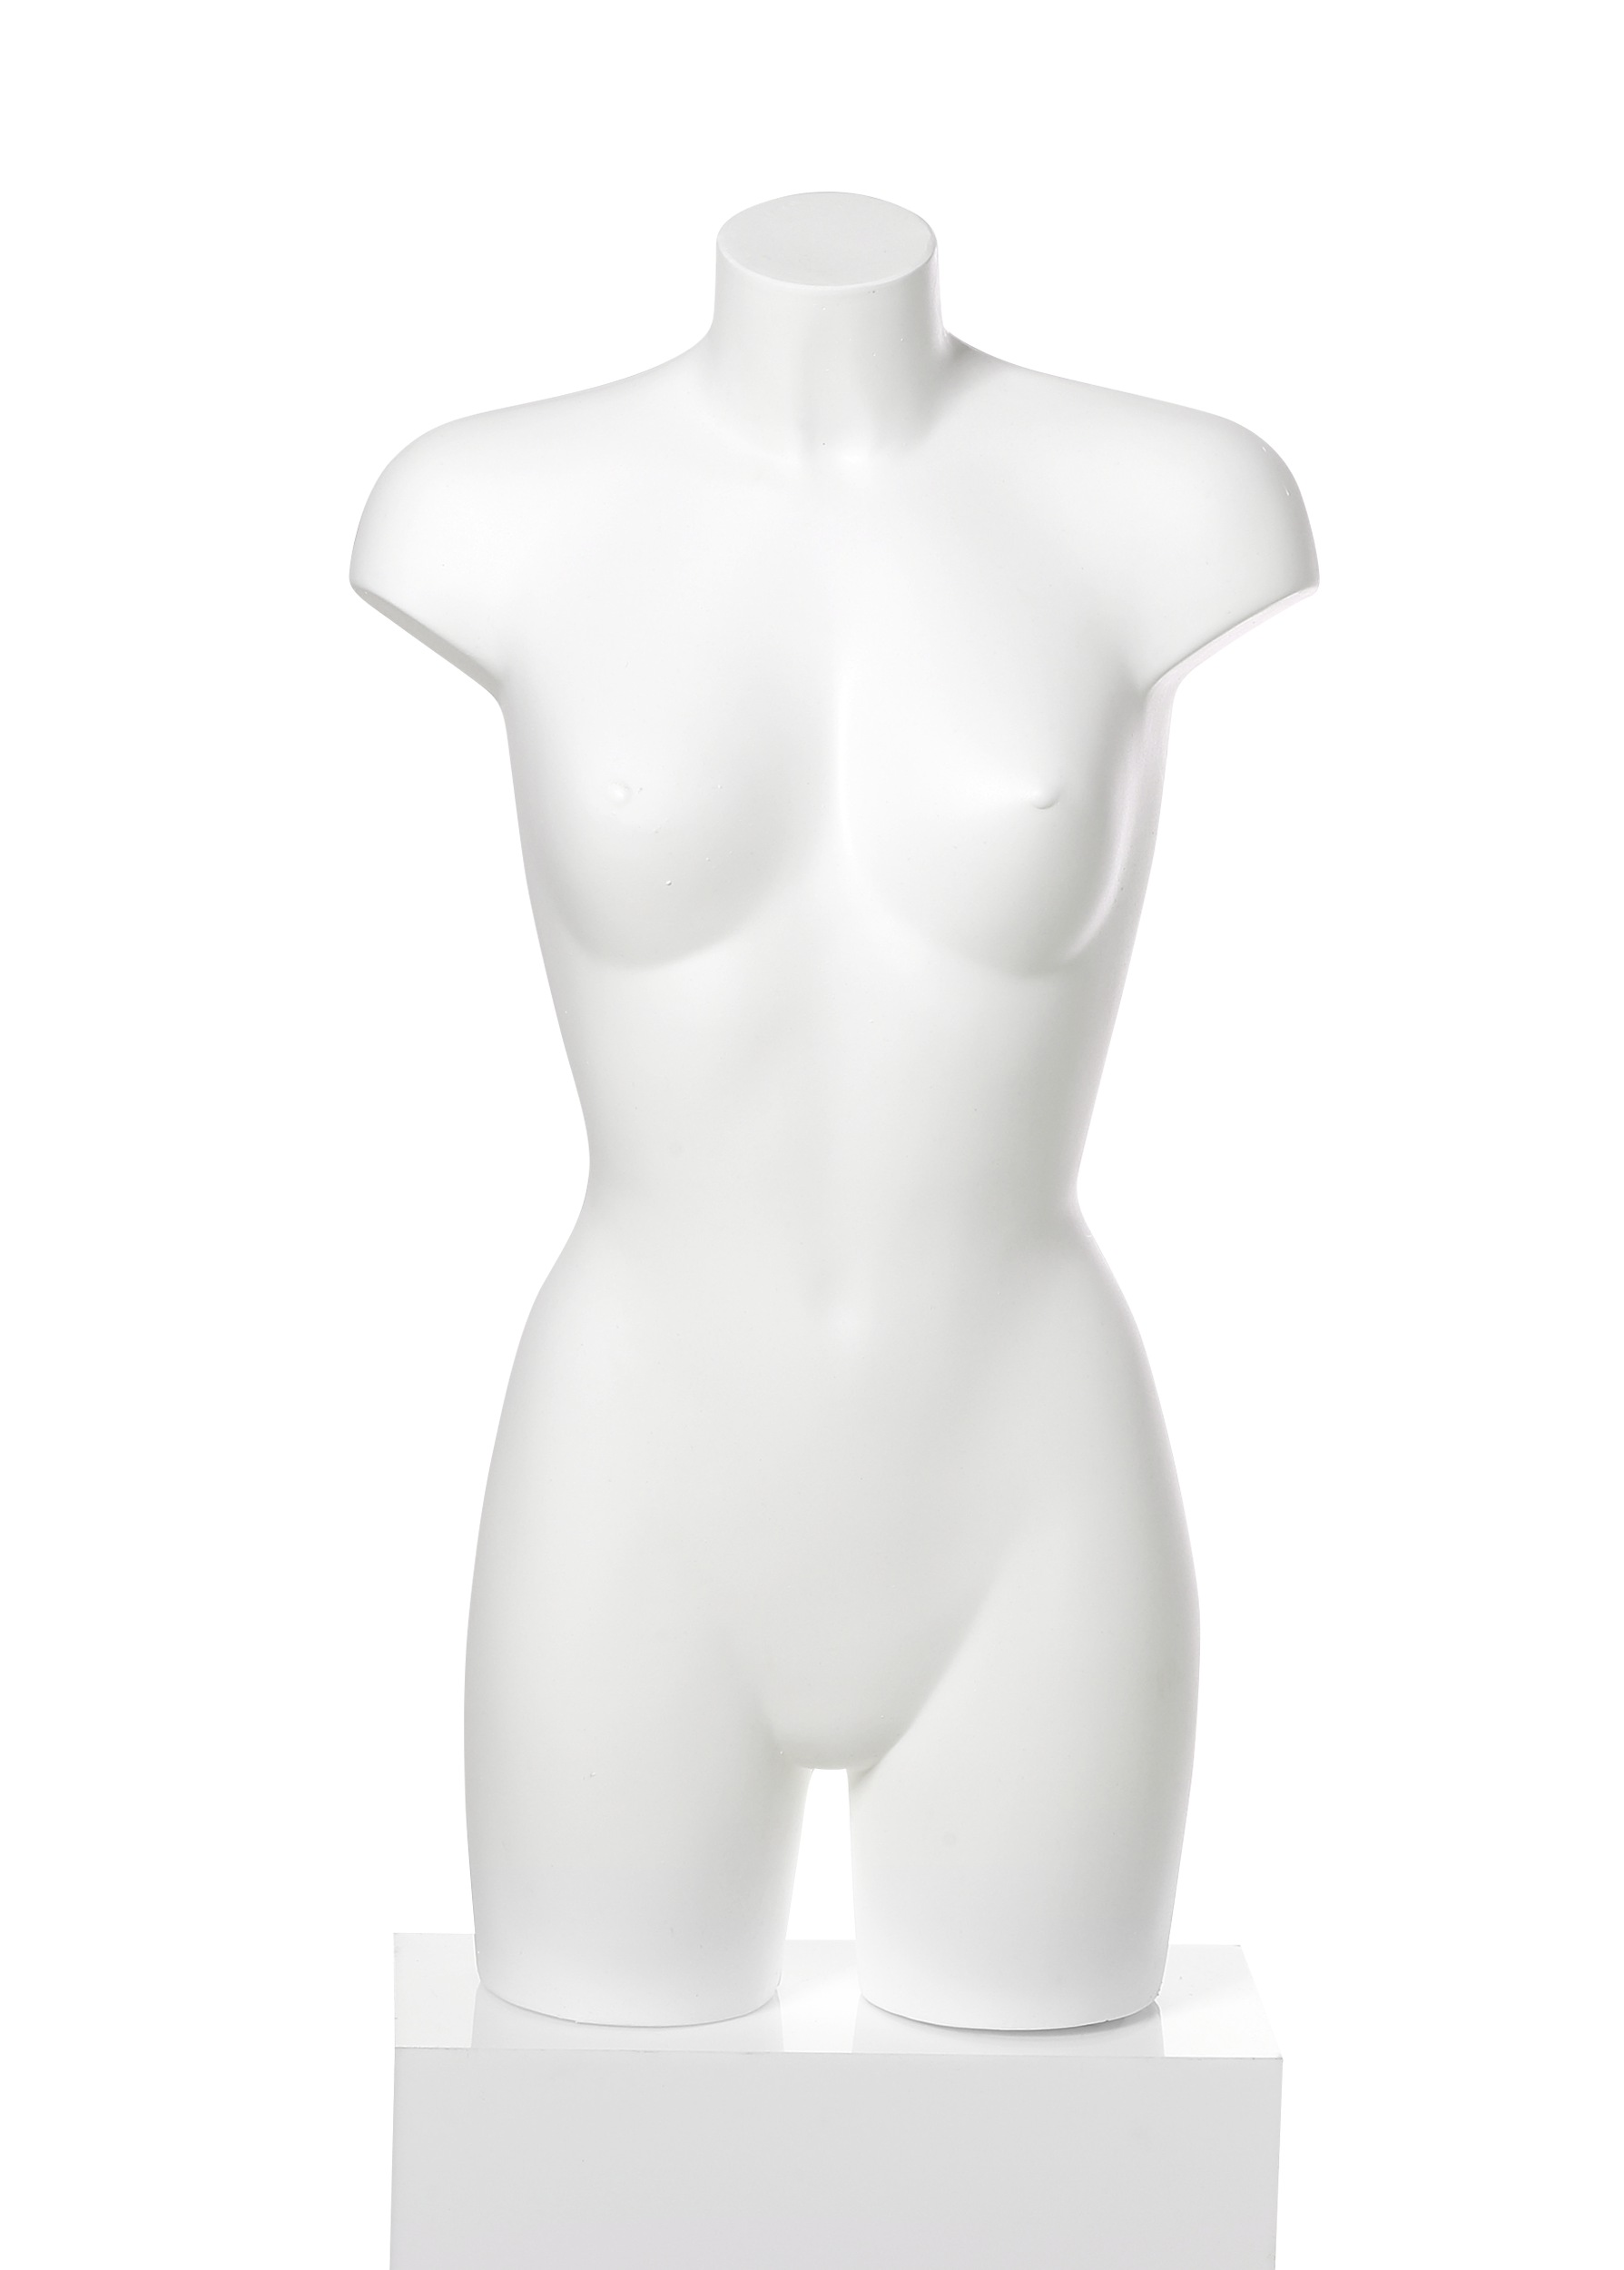 Torso without Base code 720